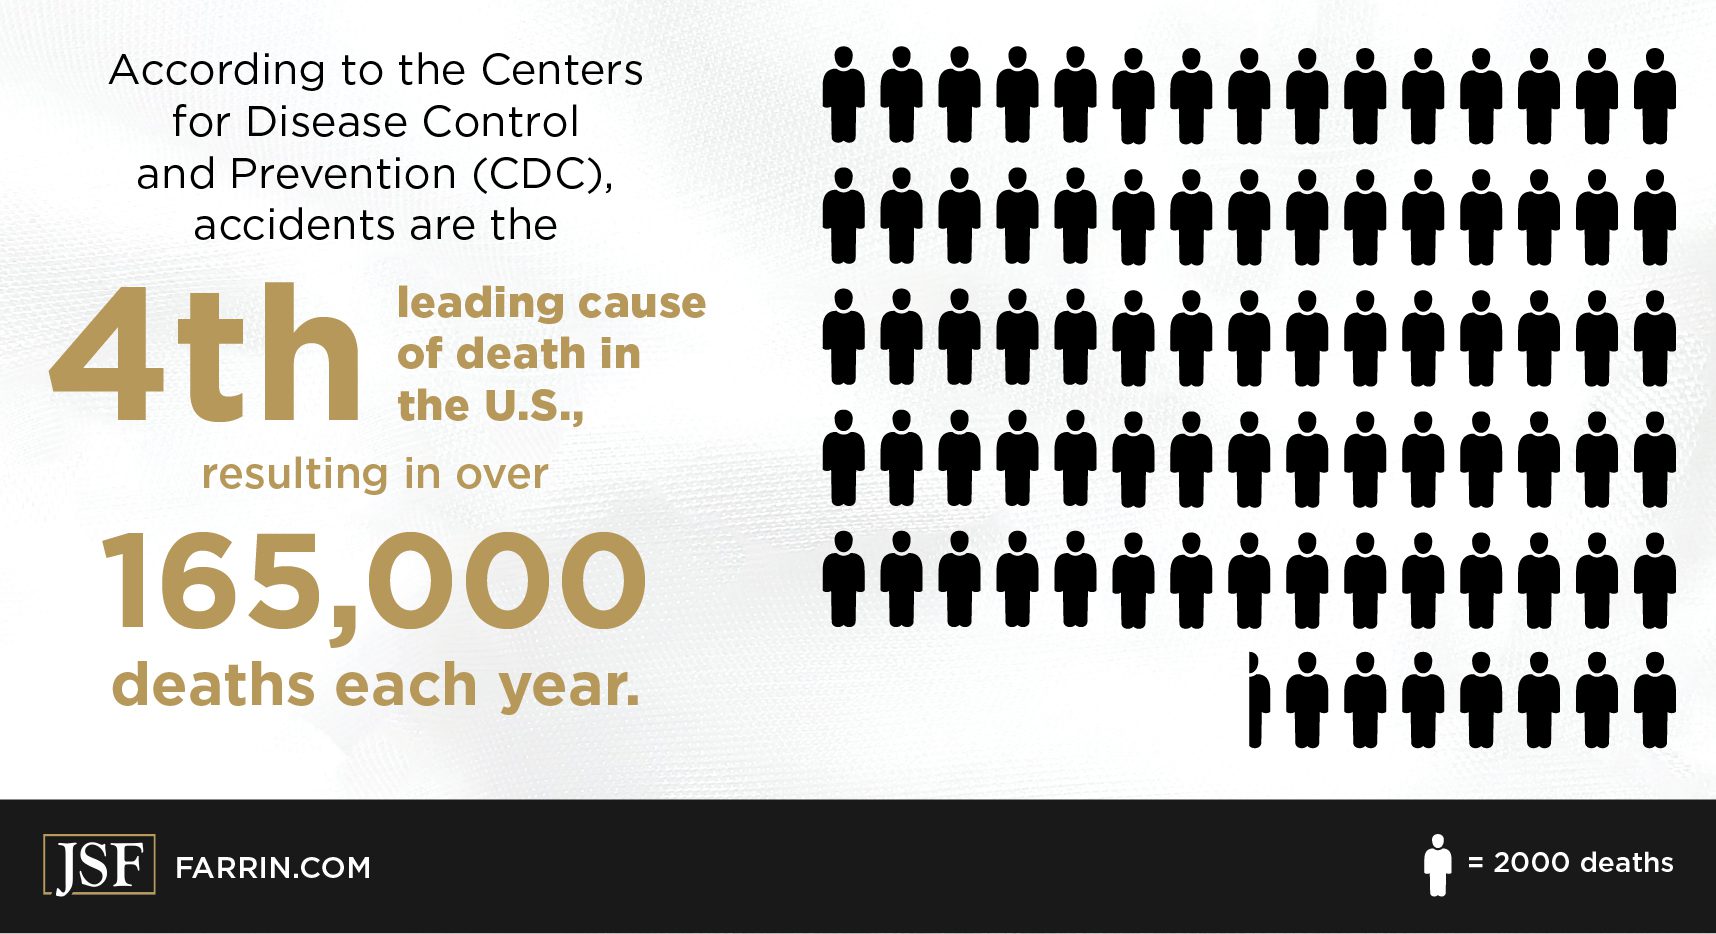 Unintentional injuries account for 165,000 deaths in the US each year, according to the CDC.